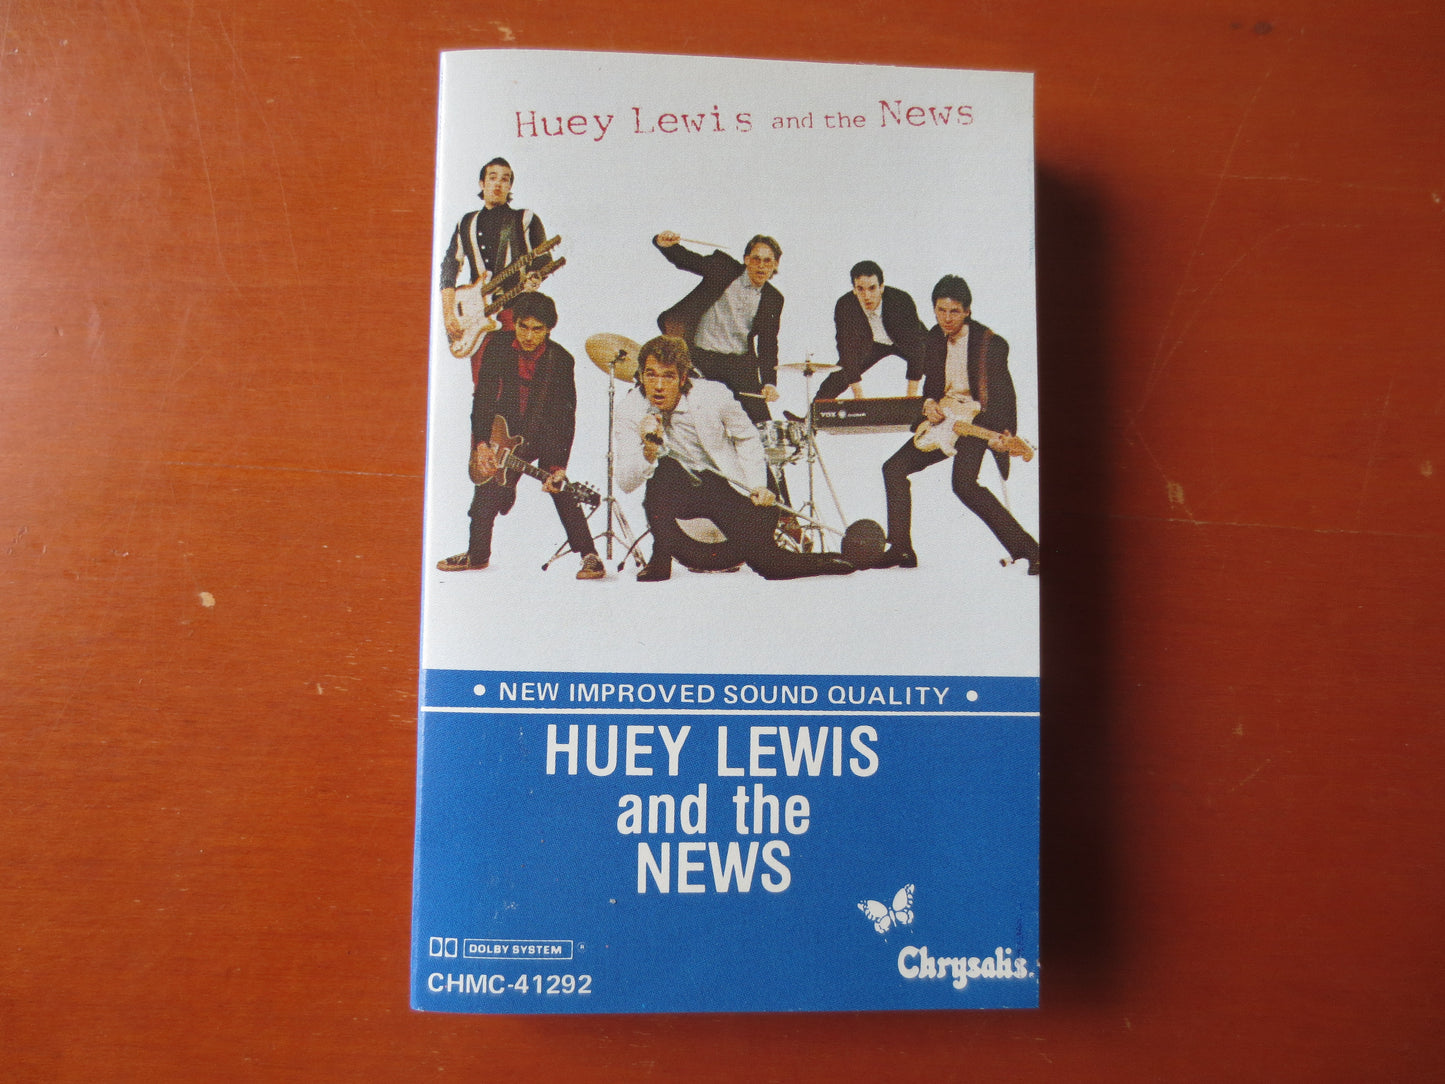 HUEY LEWIS and the NEWS, Classic Rock Tape, Classic Rock Album, Pop Music Tape, Tape Cassette, Jazz Cassette, Cassette Music